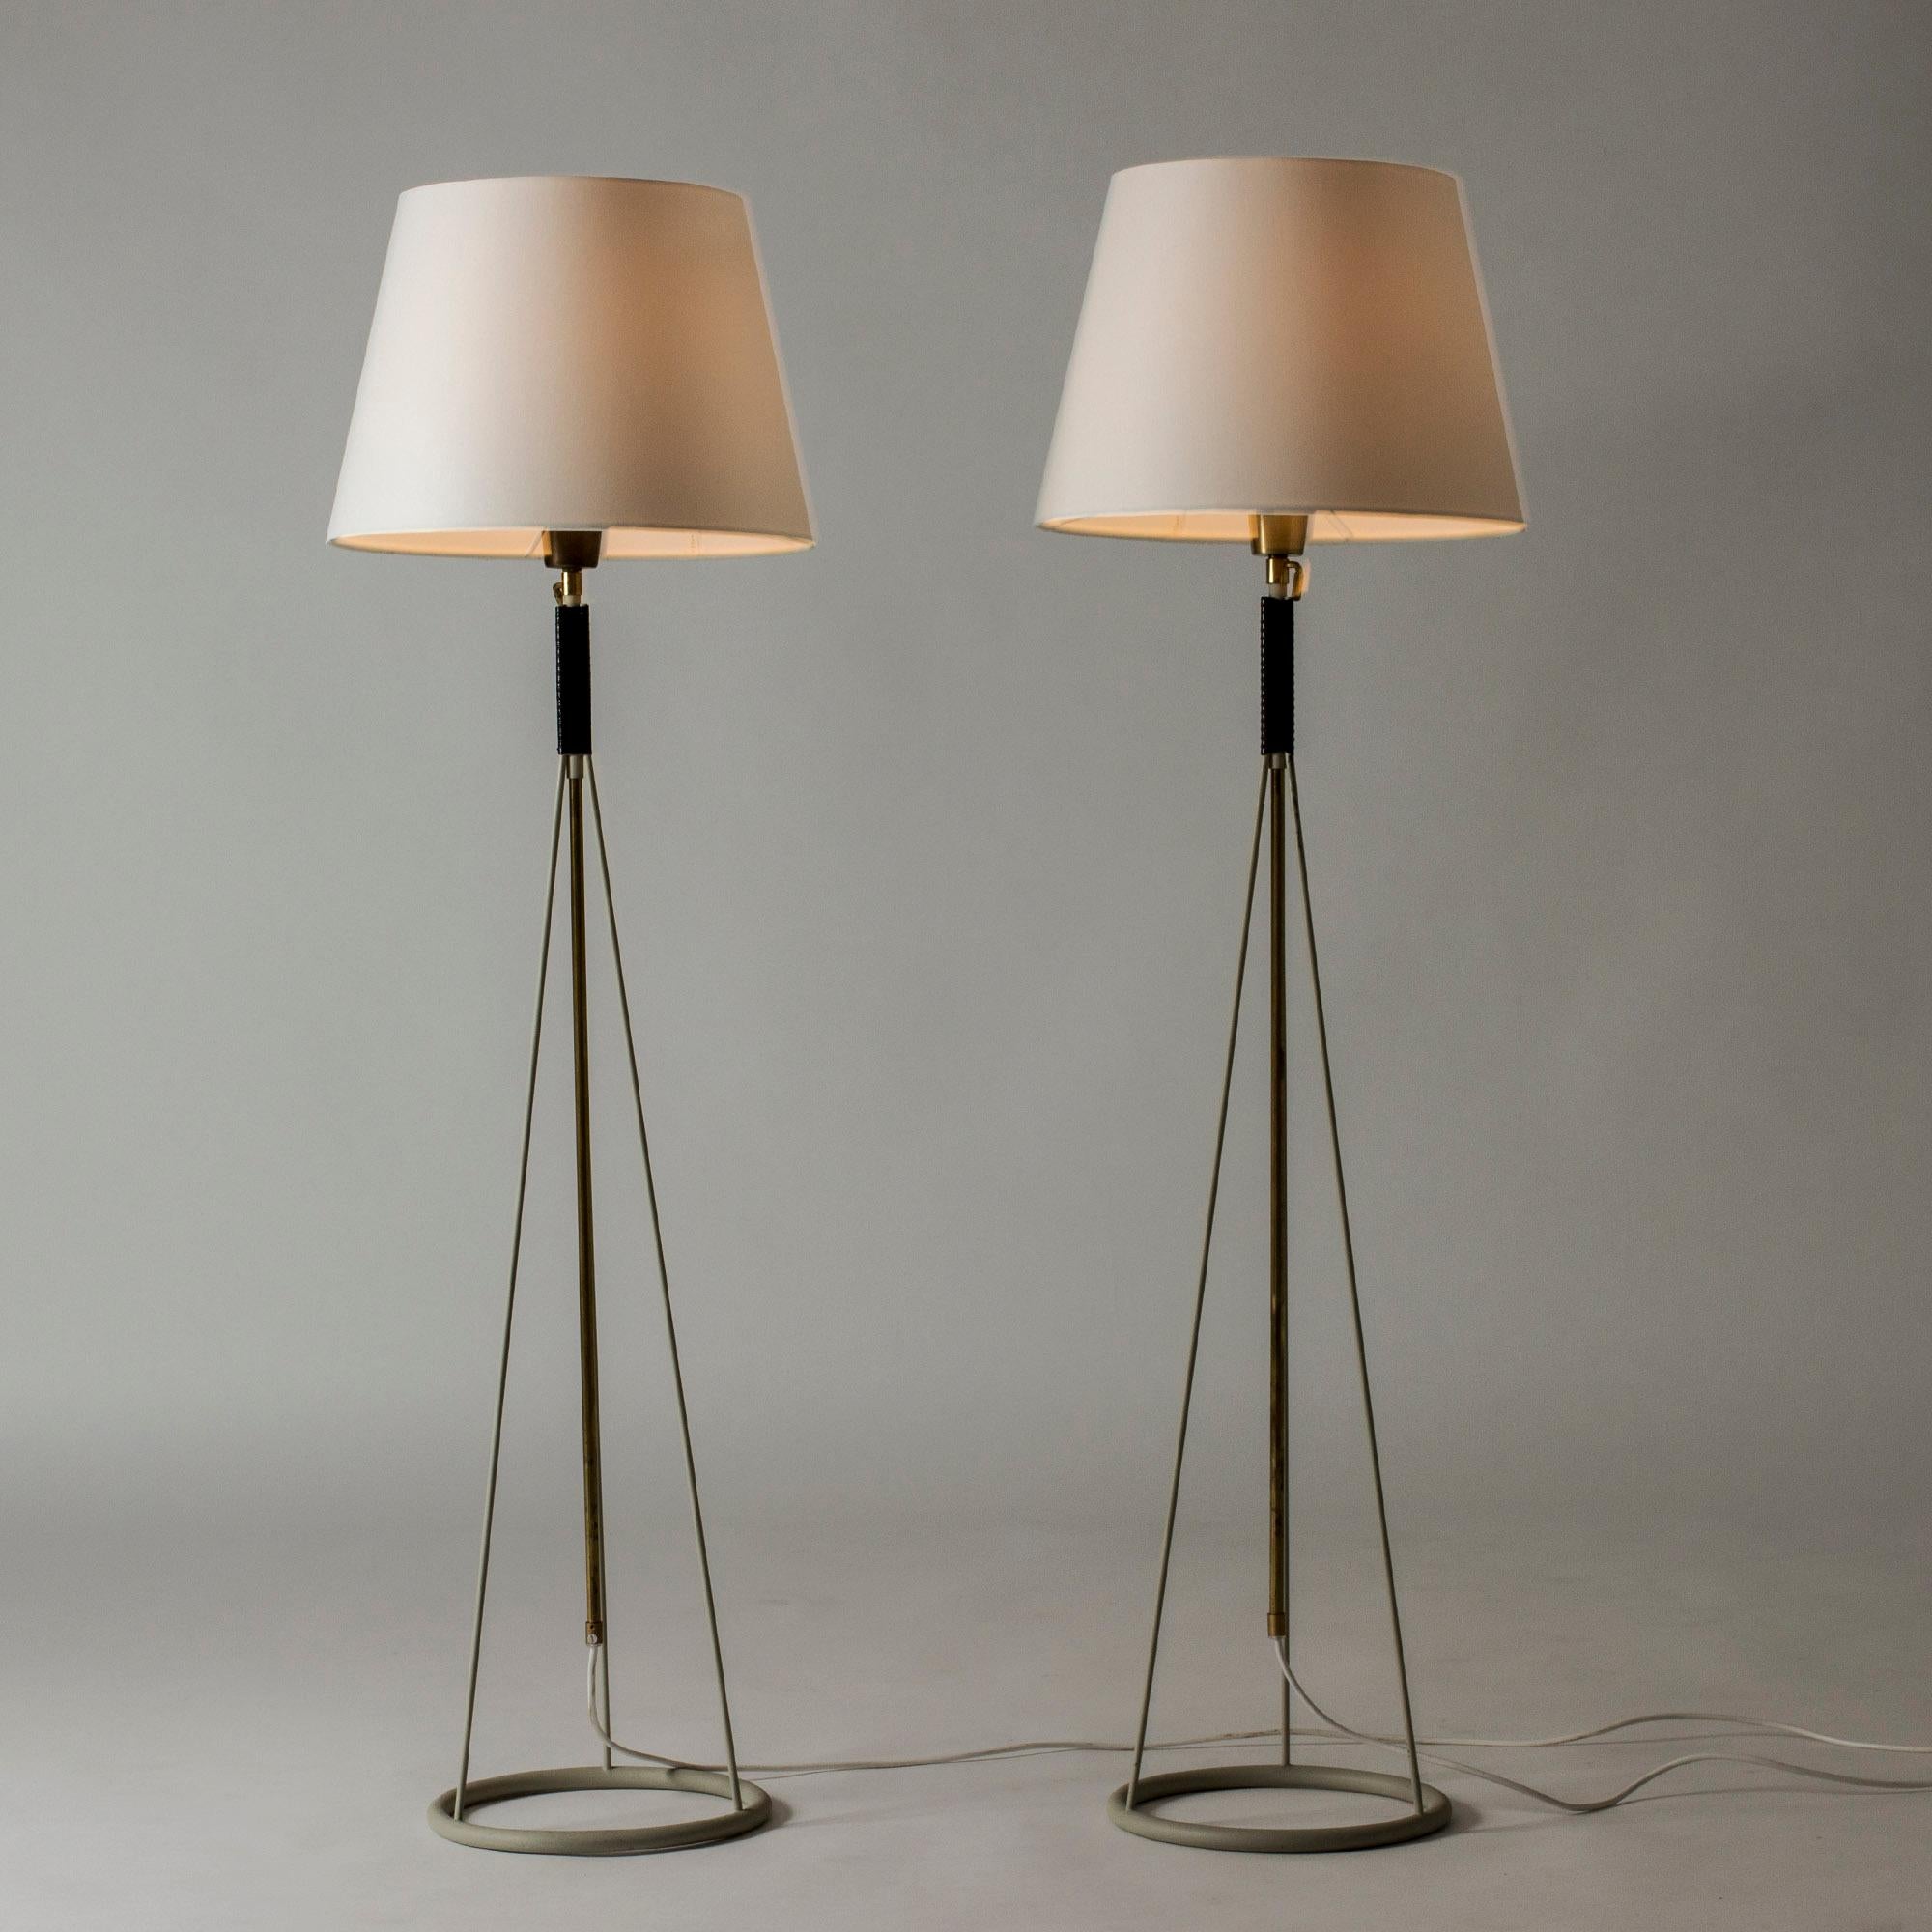 Rare pair of floor lamps by Swedish designer Eje Ahlgren for Luco (Gothenburg, Sweden 1950's). With a rather futuristic shape for the time, these floor lamps, adjustable in height using a pretty brass ferrule, provide beautiful light. The elegant